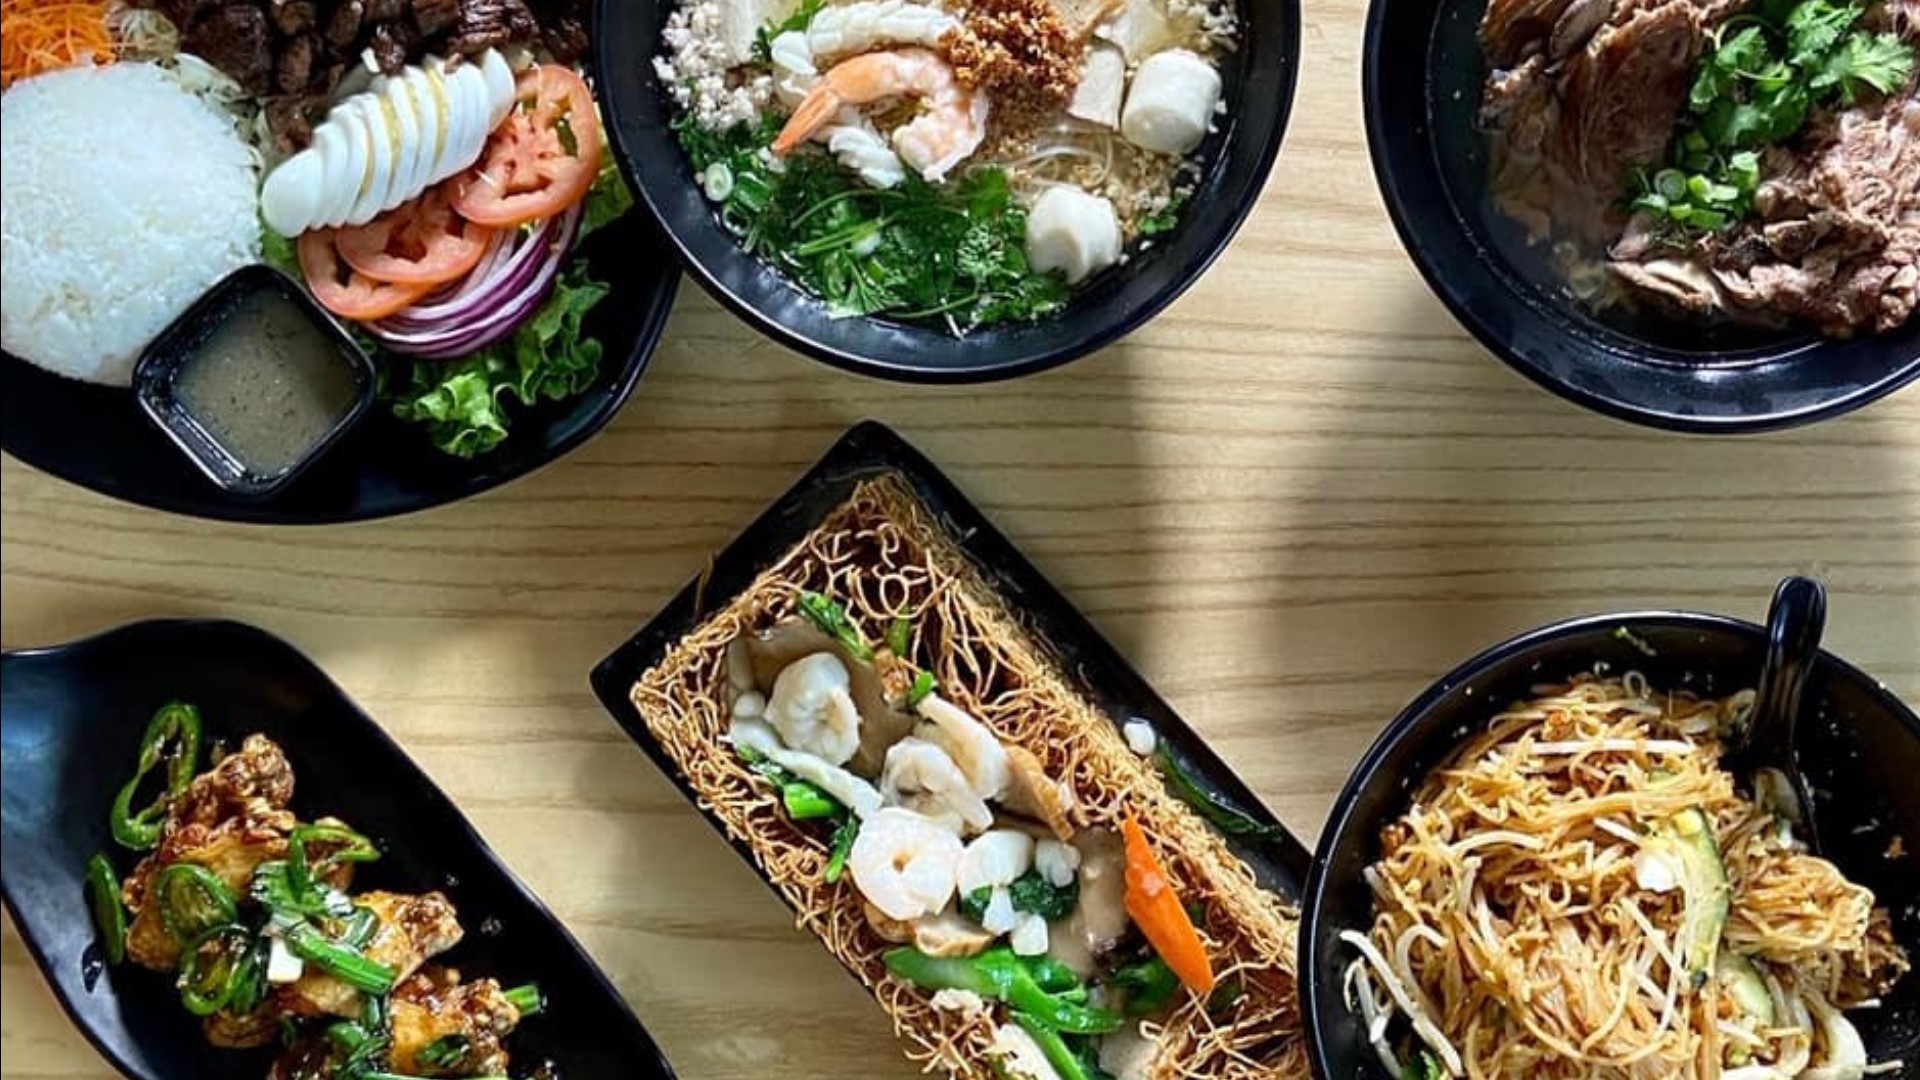 The beloved family restaurant in the Chinatown - International District is now serving takeout.